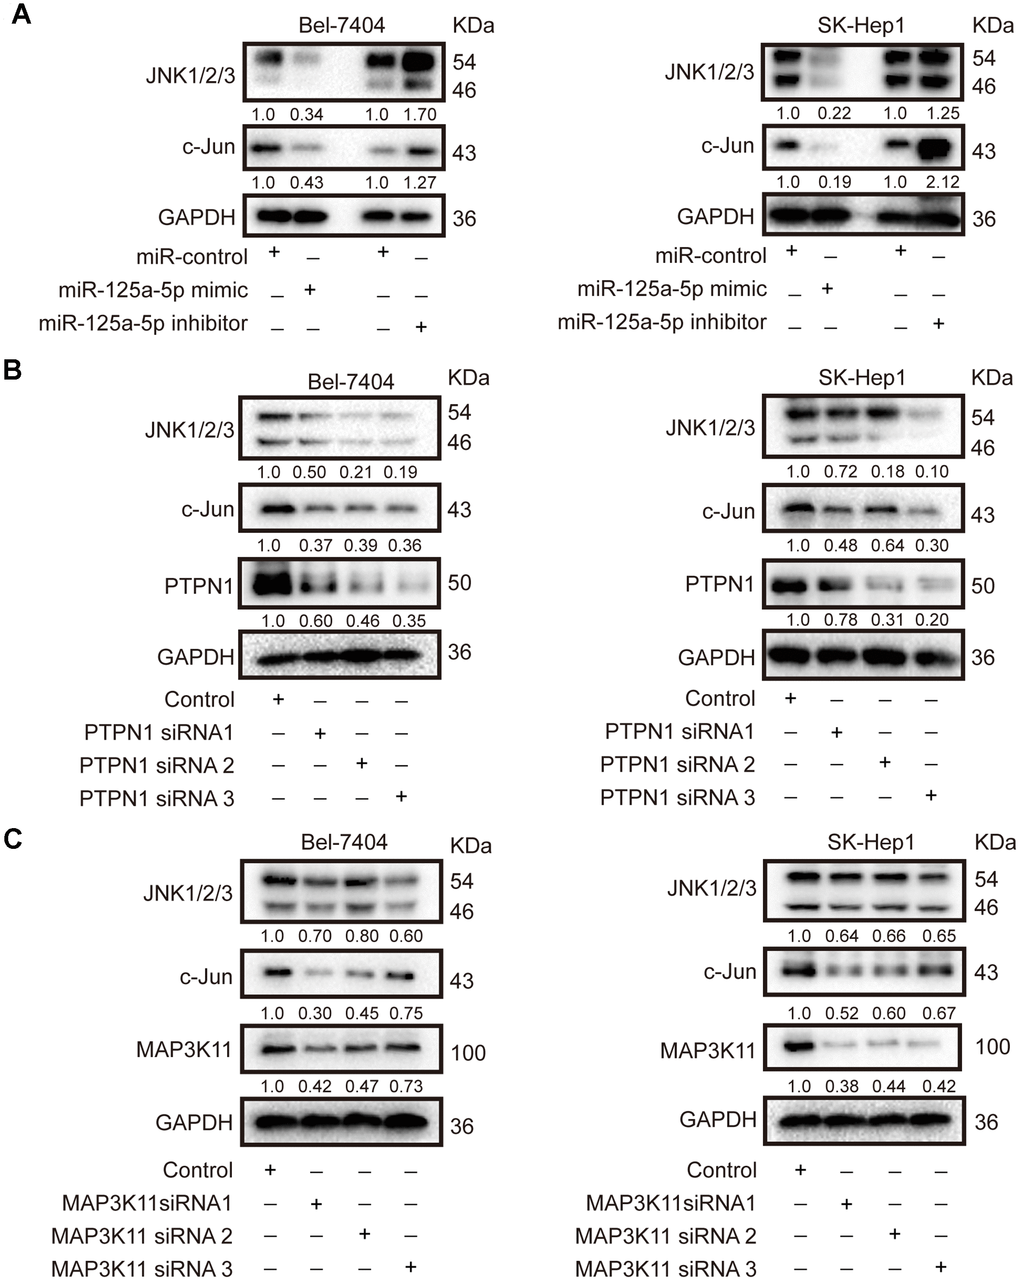 miR-125a-5p suppresses PTPN1 and MAP3K11 expression via the MAPK signaling pathway in HCC. (A) Western blots indicated that miR-125a-5p overexpression reduced, while miR-125a-5p knockdown increased, the expression of JNK1/2/3 and c-Jun in Bel-7404 and SK-Hep1 cells. (B and C) Western blots showed that PTPN1 and MAP3K11 knockdown decreased the expression of JNK1/2/3 and c-Jun in Bel-7404 and SK-Hep1 cells.